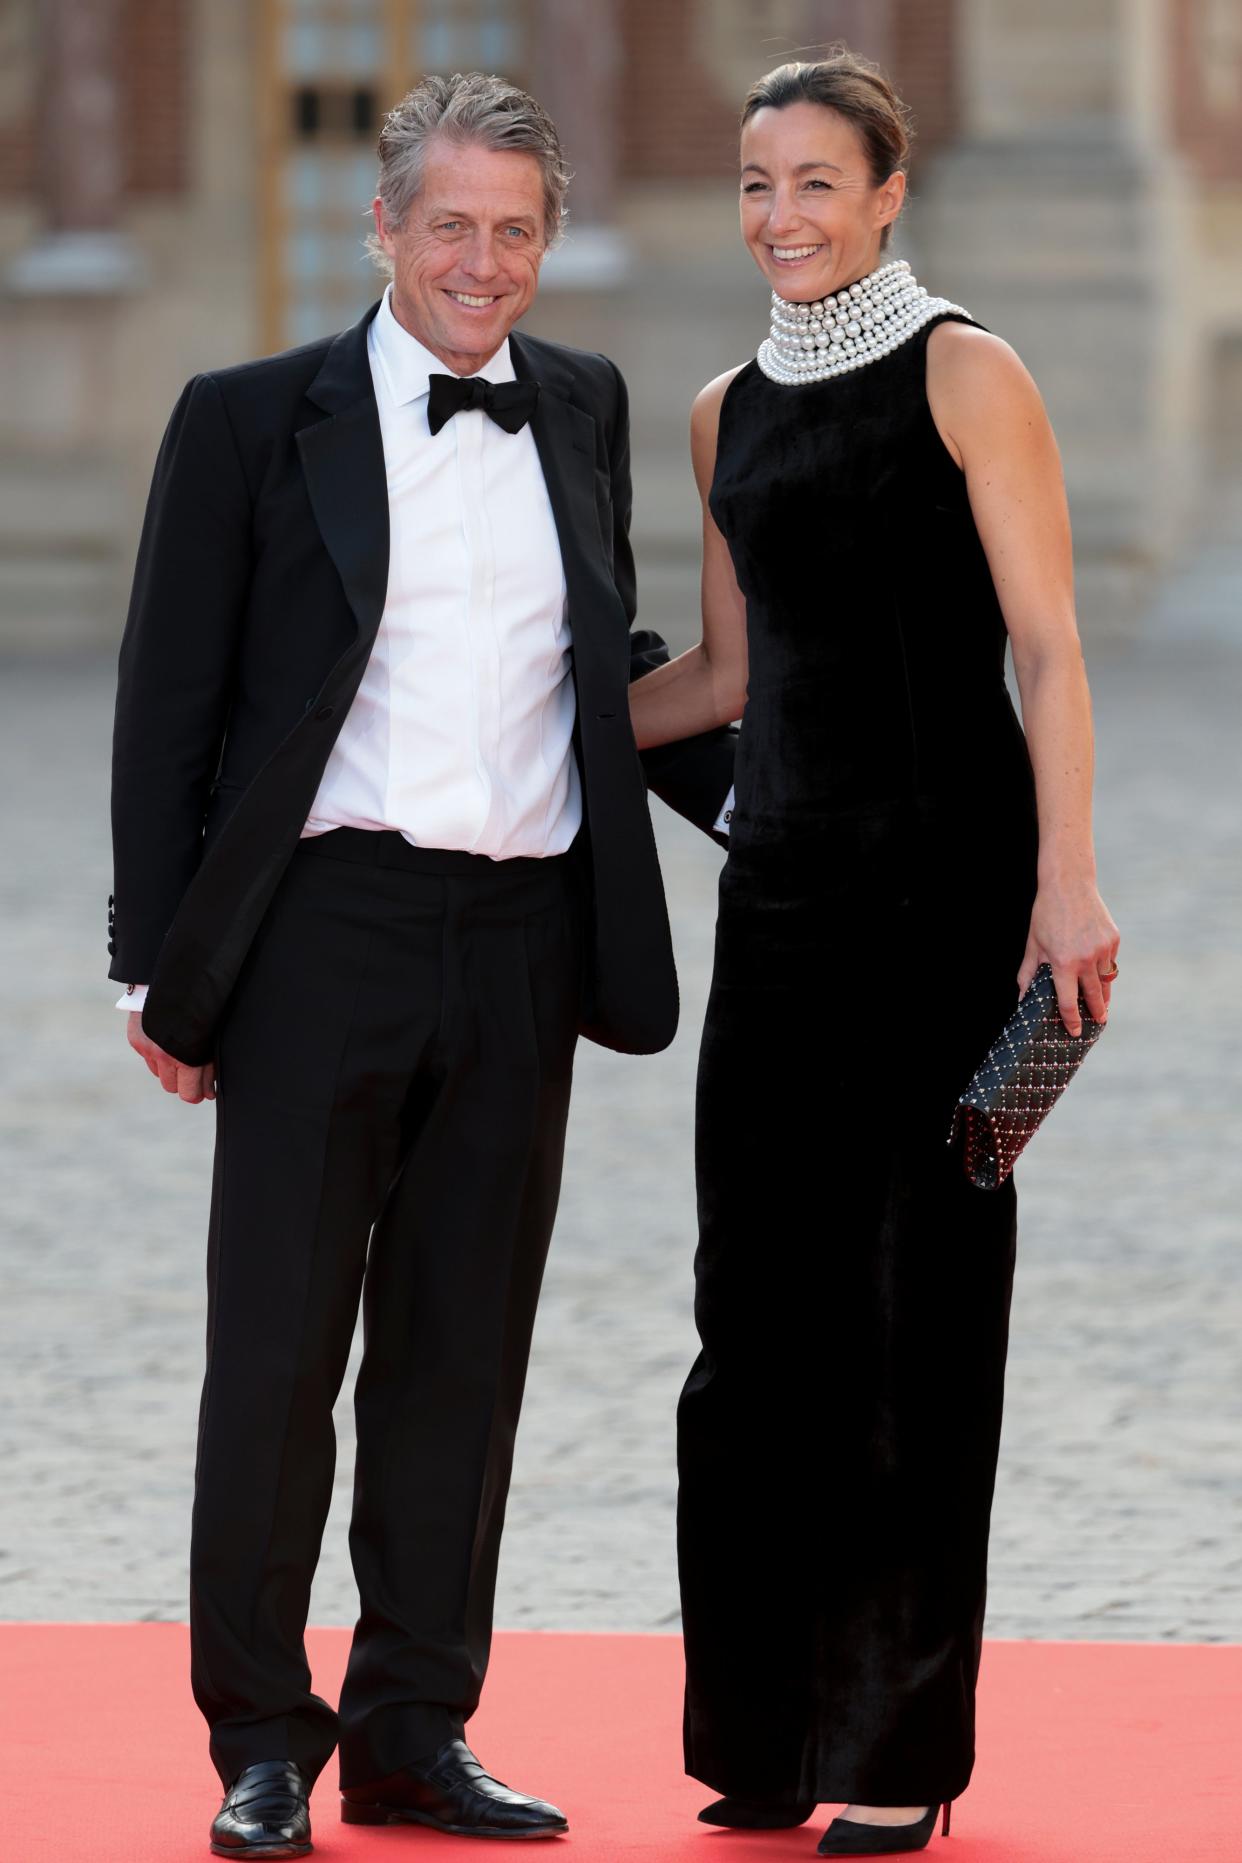 Hugh Grant and Anna Elisabet Eberstein arrive ahead of  the lavish state dinner (Getty Images)